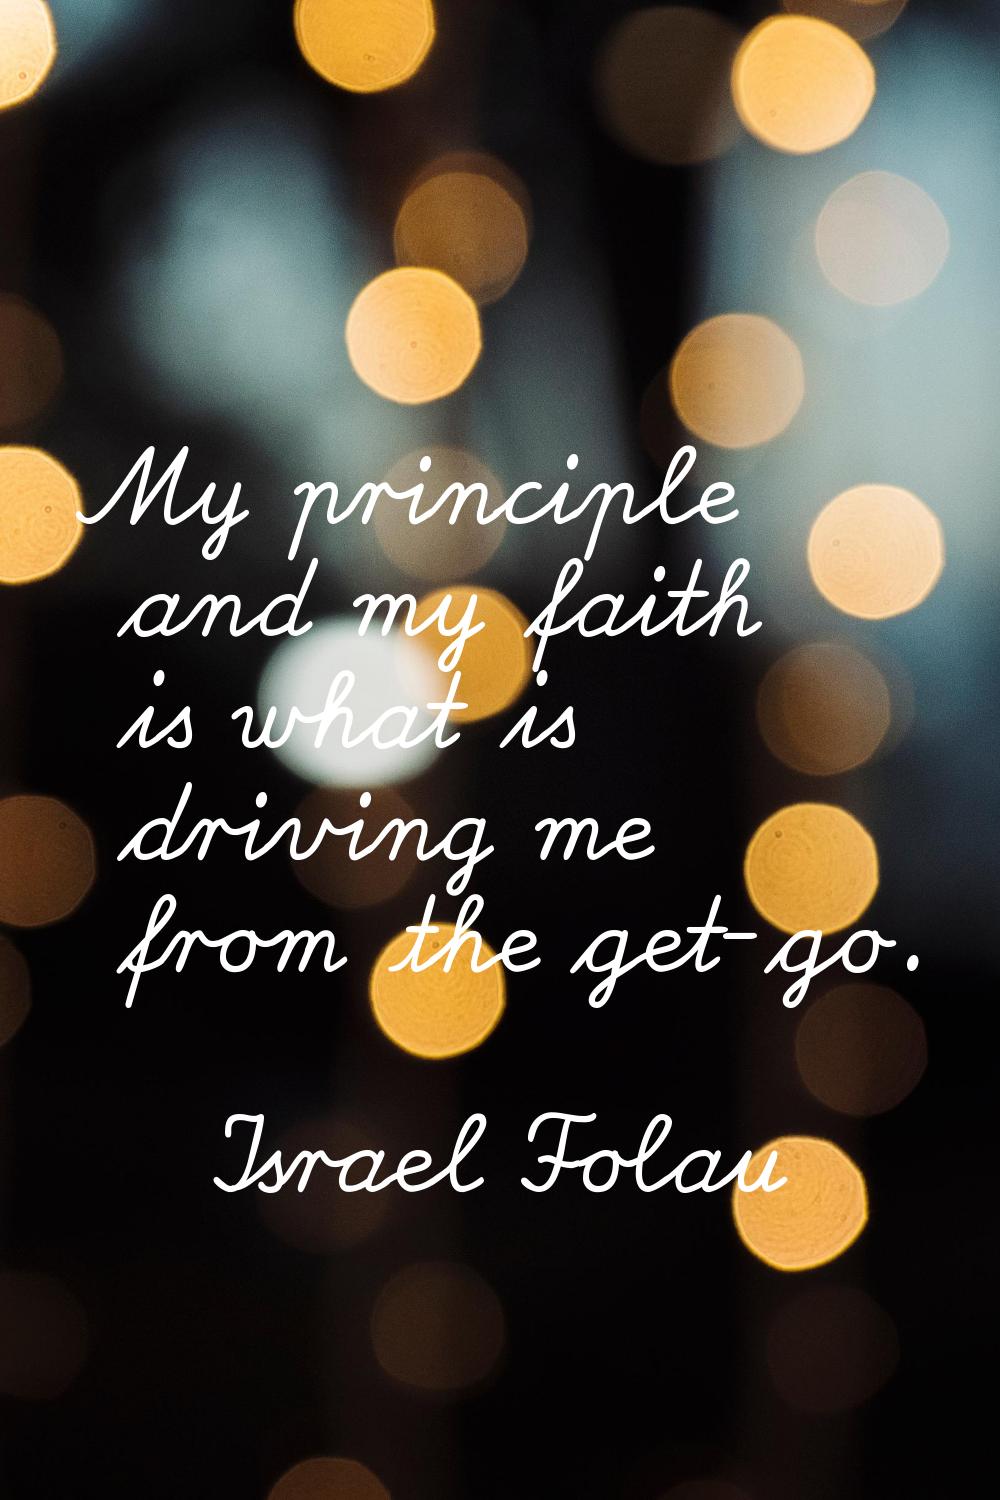 My principle and my faith is what is driving me from the get-go.